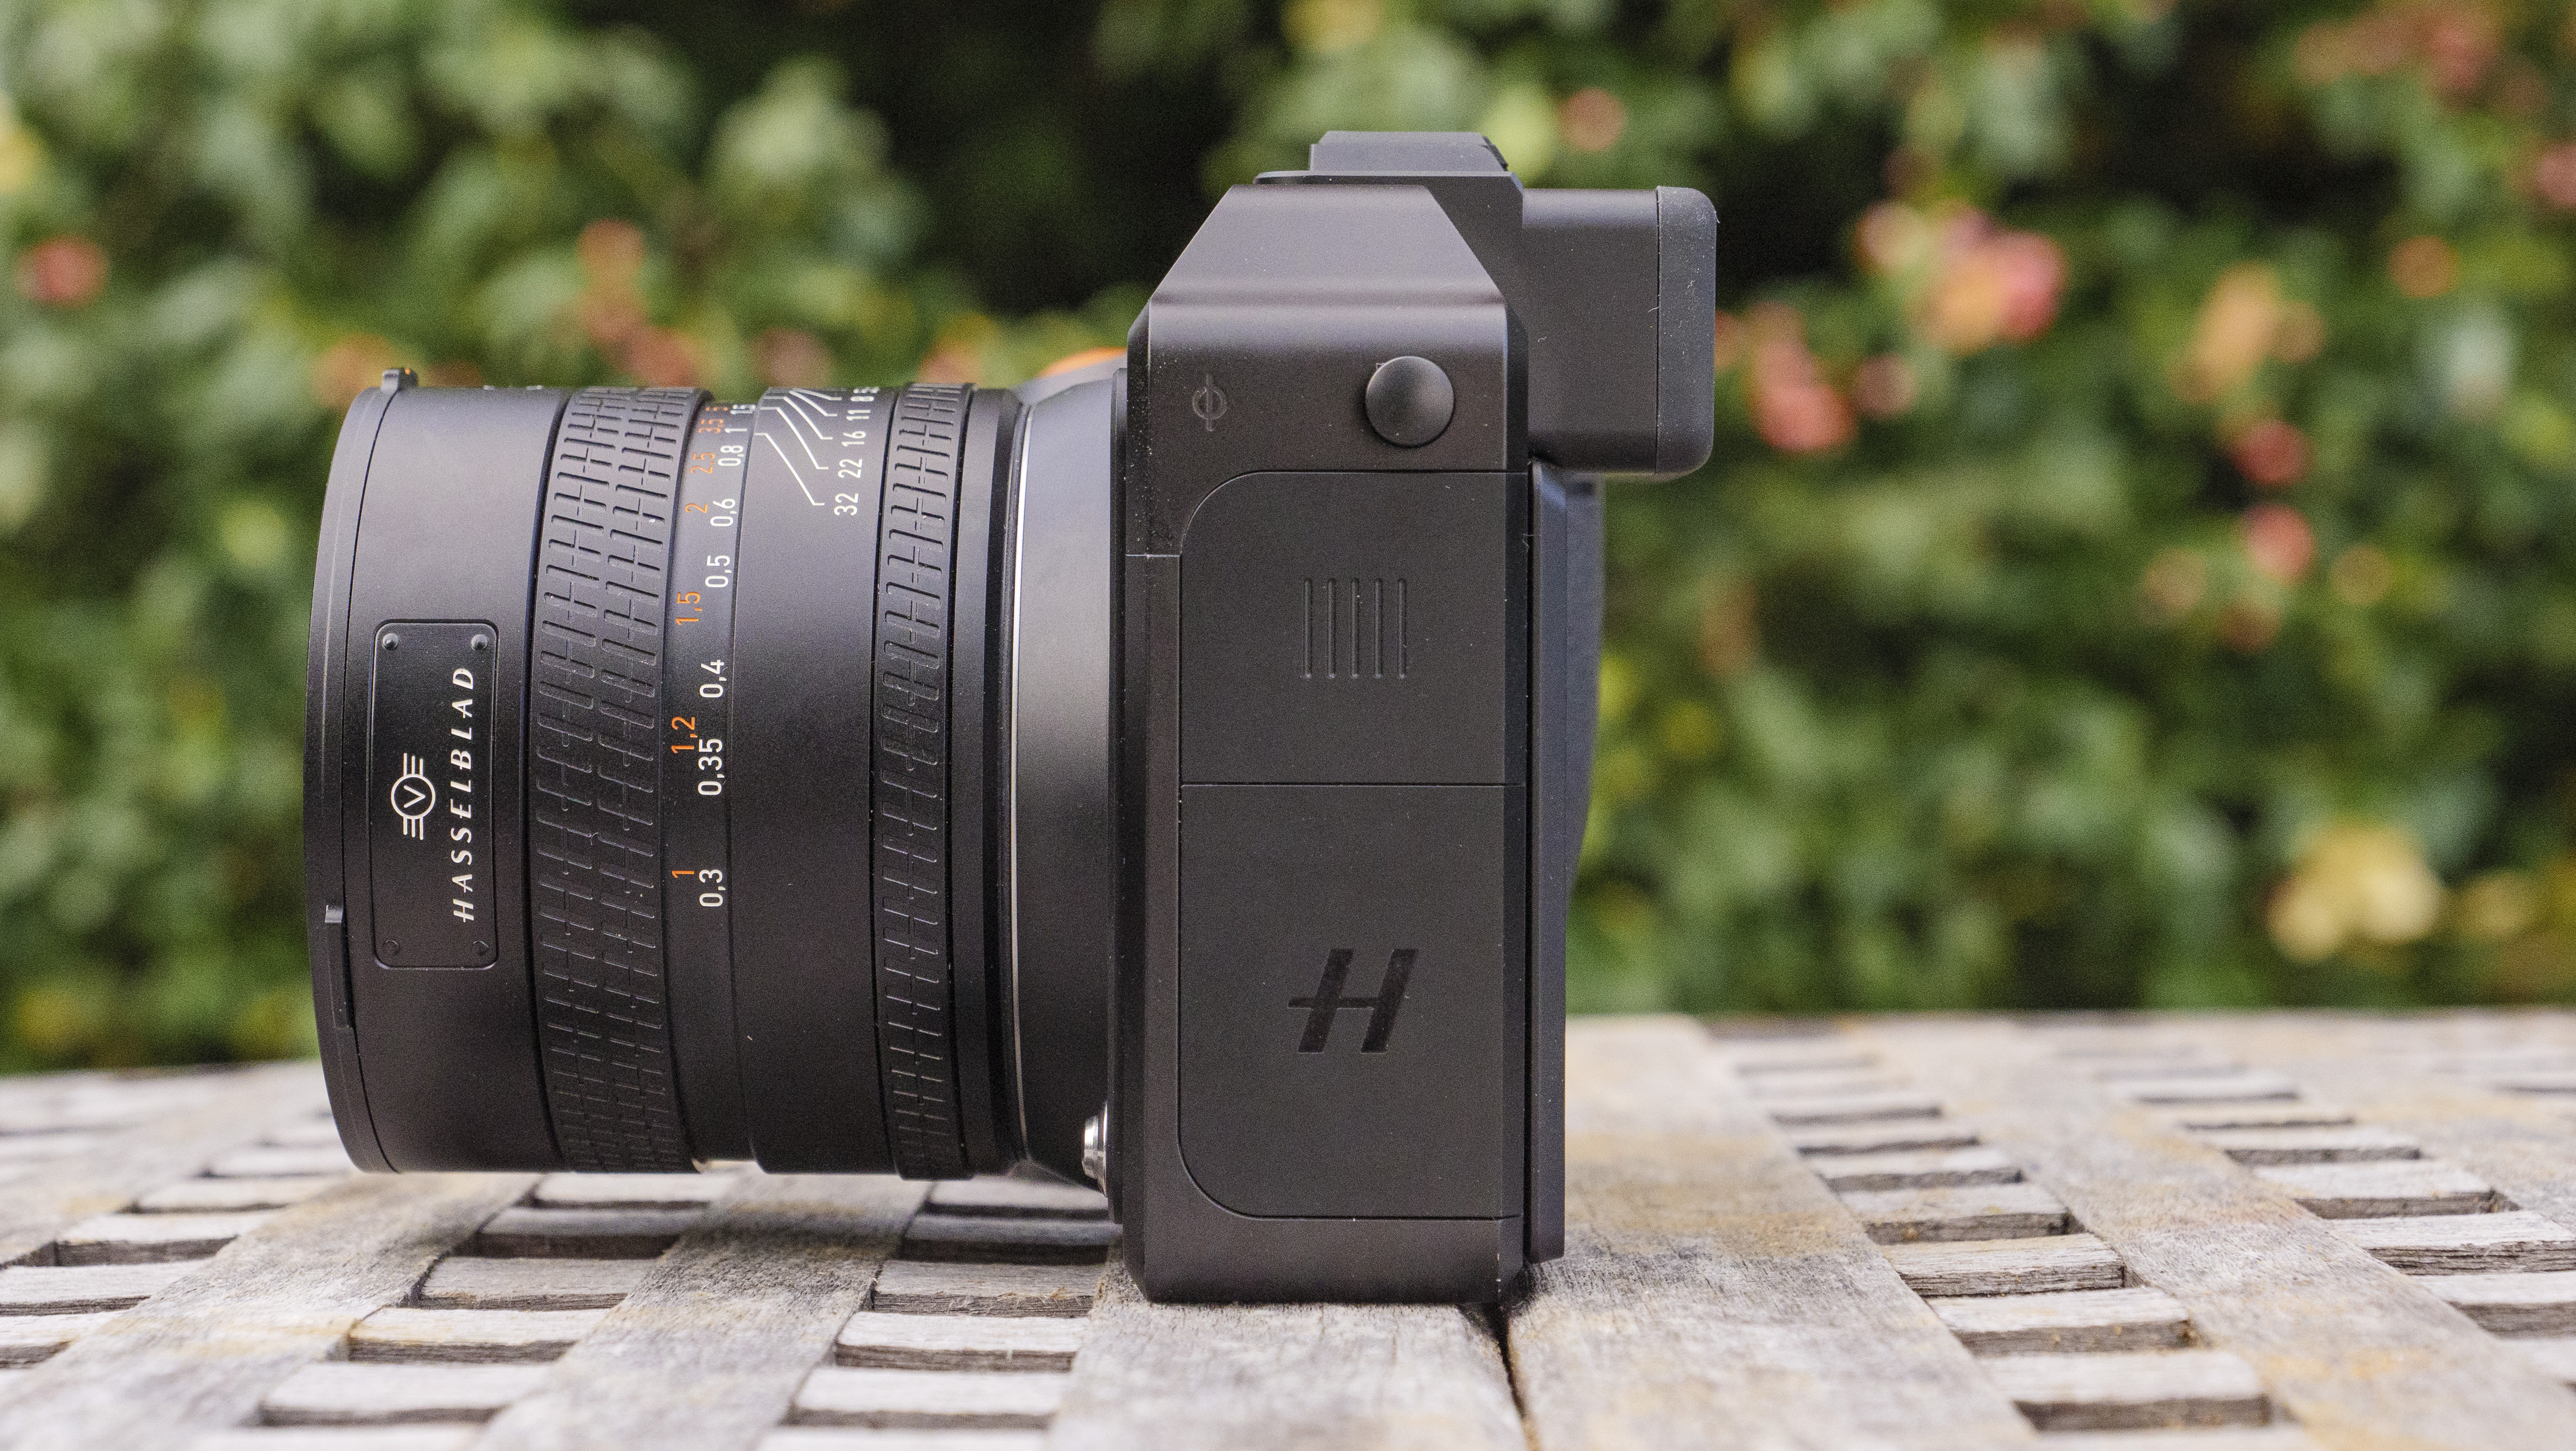 The Hasselblad X2D 100C camera's side